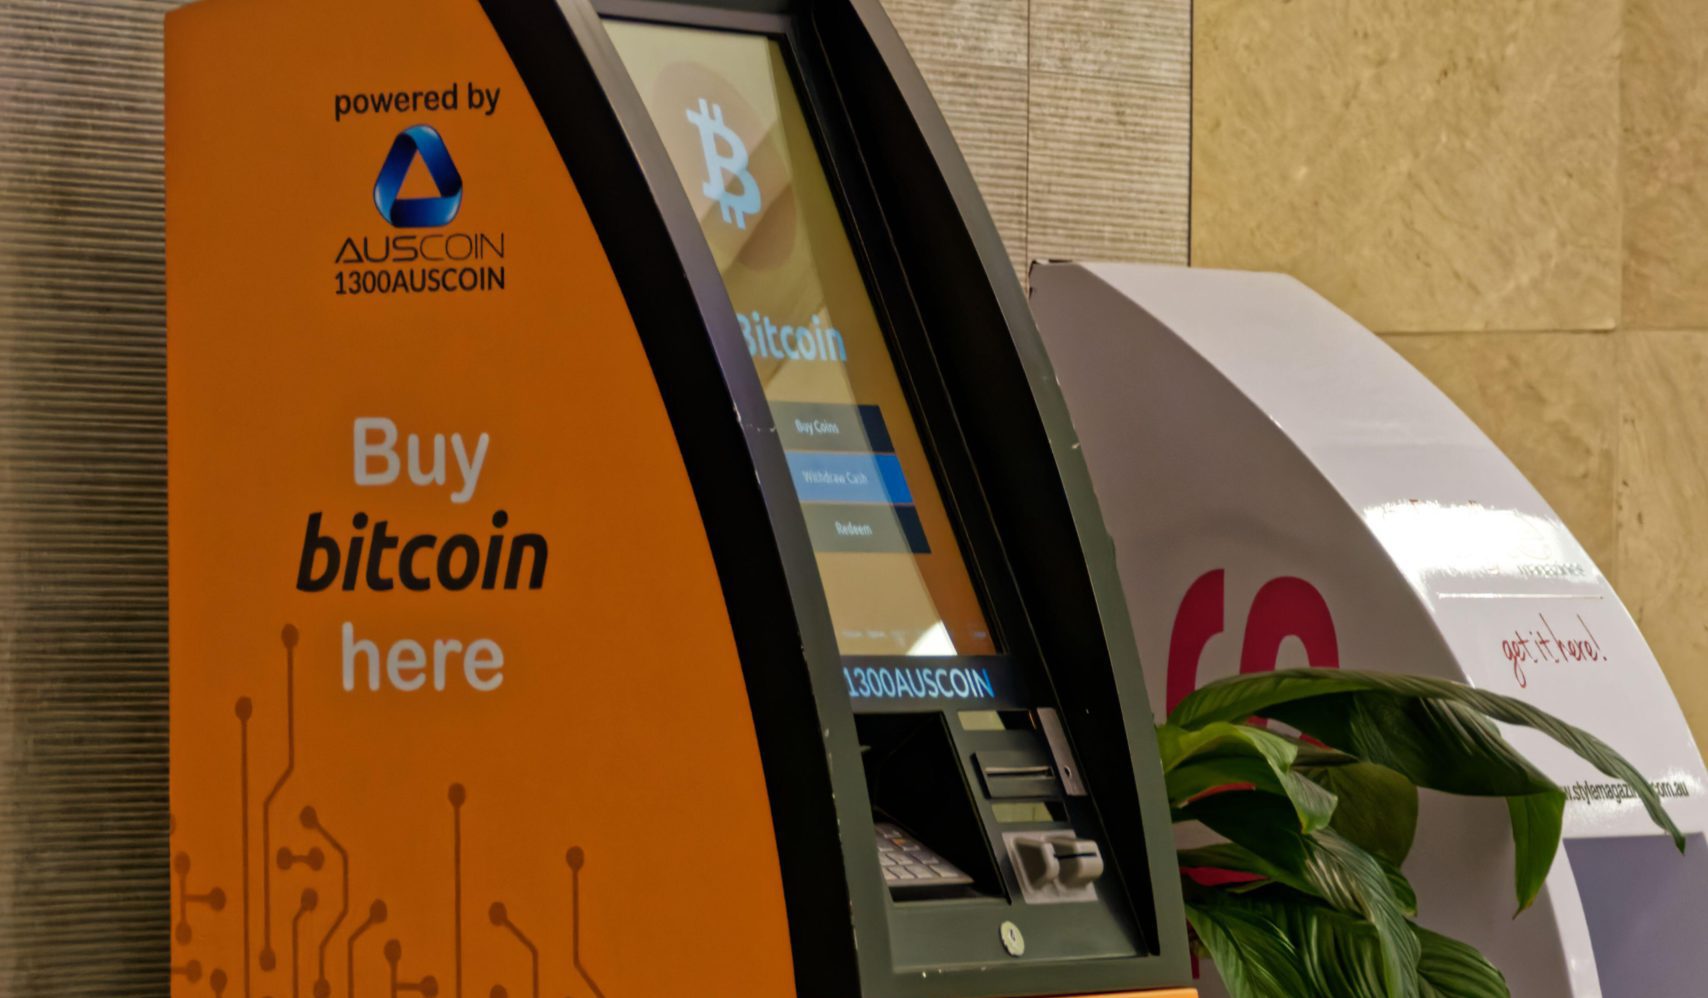 news:-crypto-is-the-mainstream-money-laundering-avenue-to-send-dirty-money-offshore;-atms-are-increasing-problem,-warns-austrac